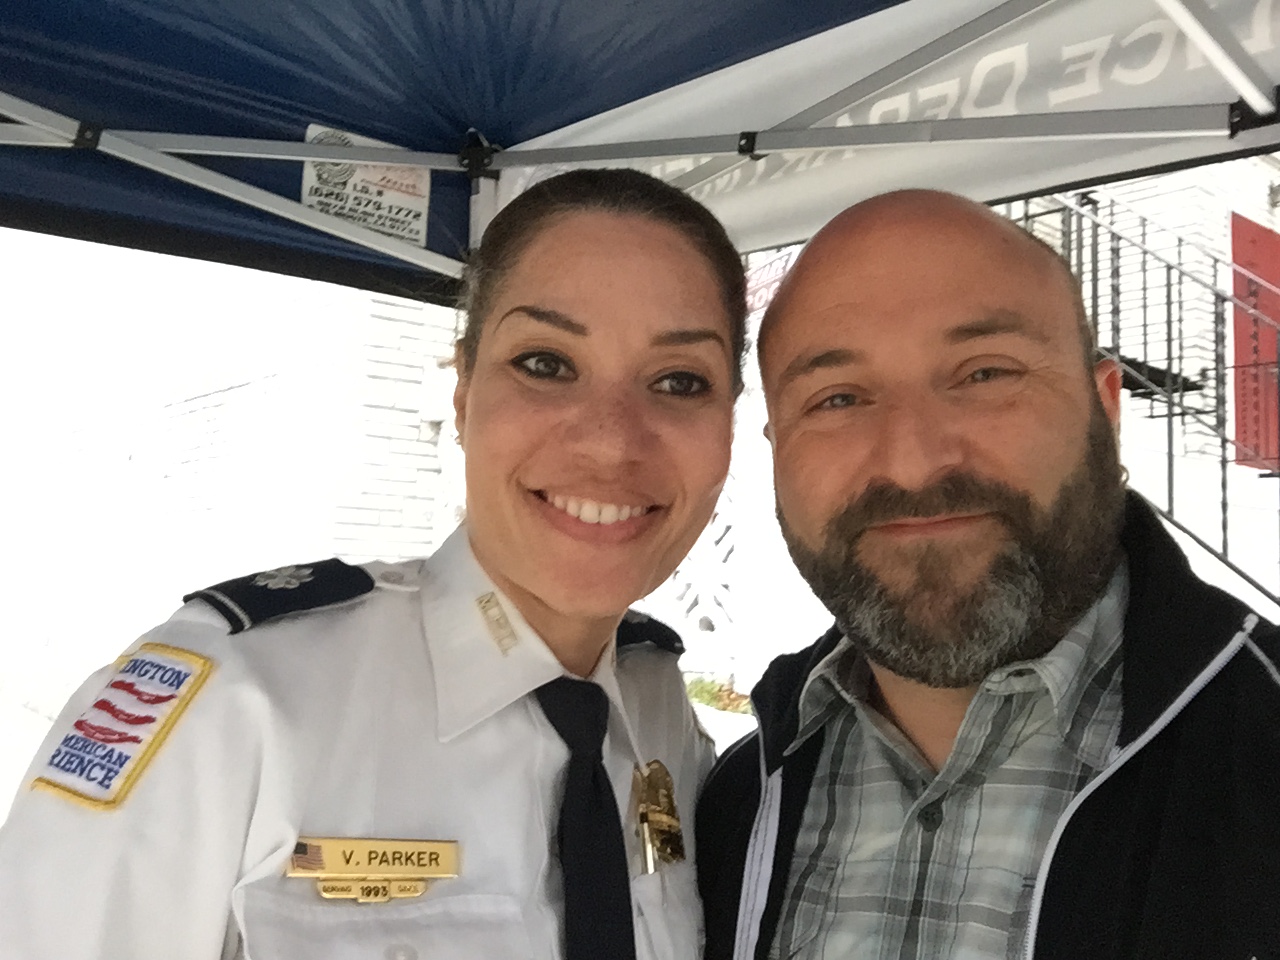   MPD 4D Inspector Vendette Parker poses for a selfie with Drew at the #IWishUKnew event she held at the Petworth Metro. I appreciate that Inspector Parker is trying to connect with residents... and humors my quirk for selfies.&nbsp;    6/3/2105  